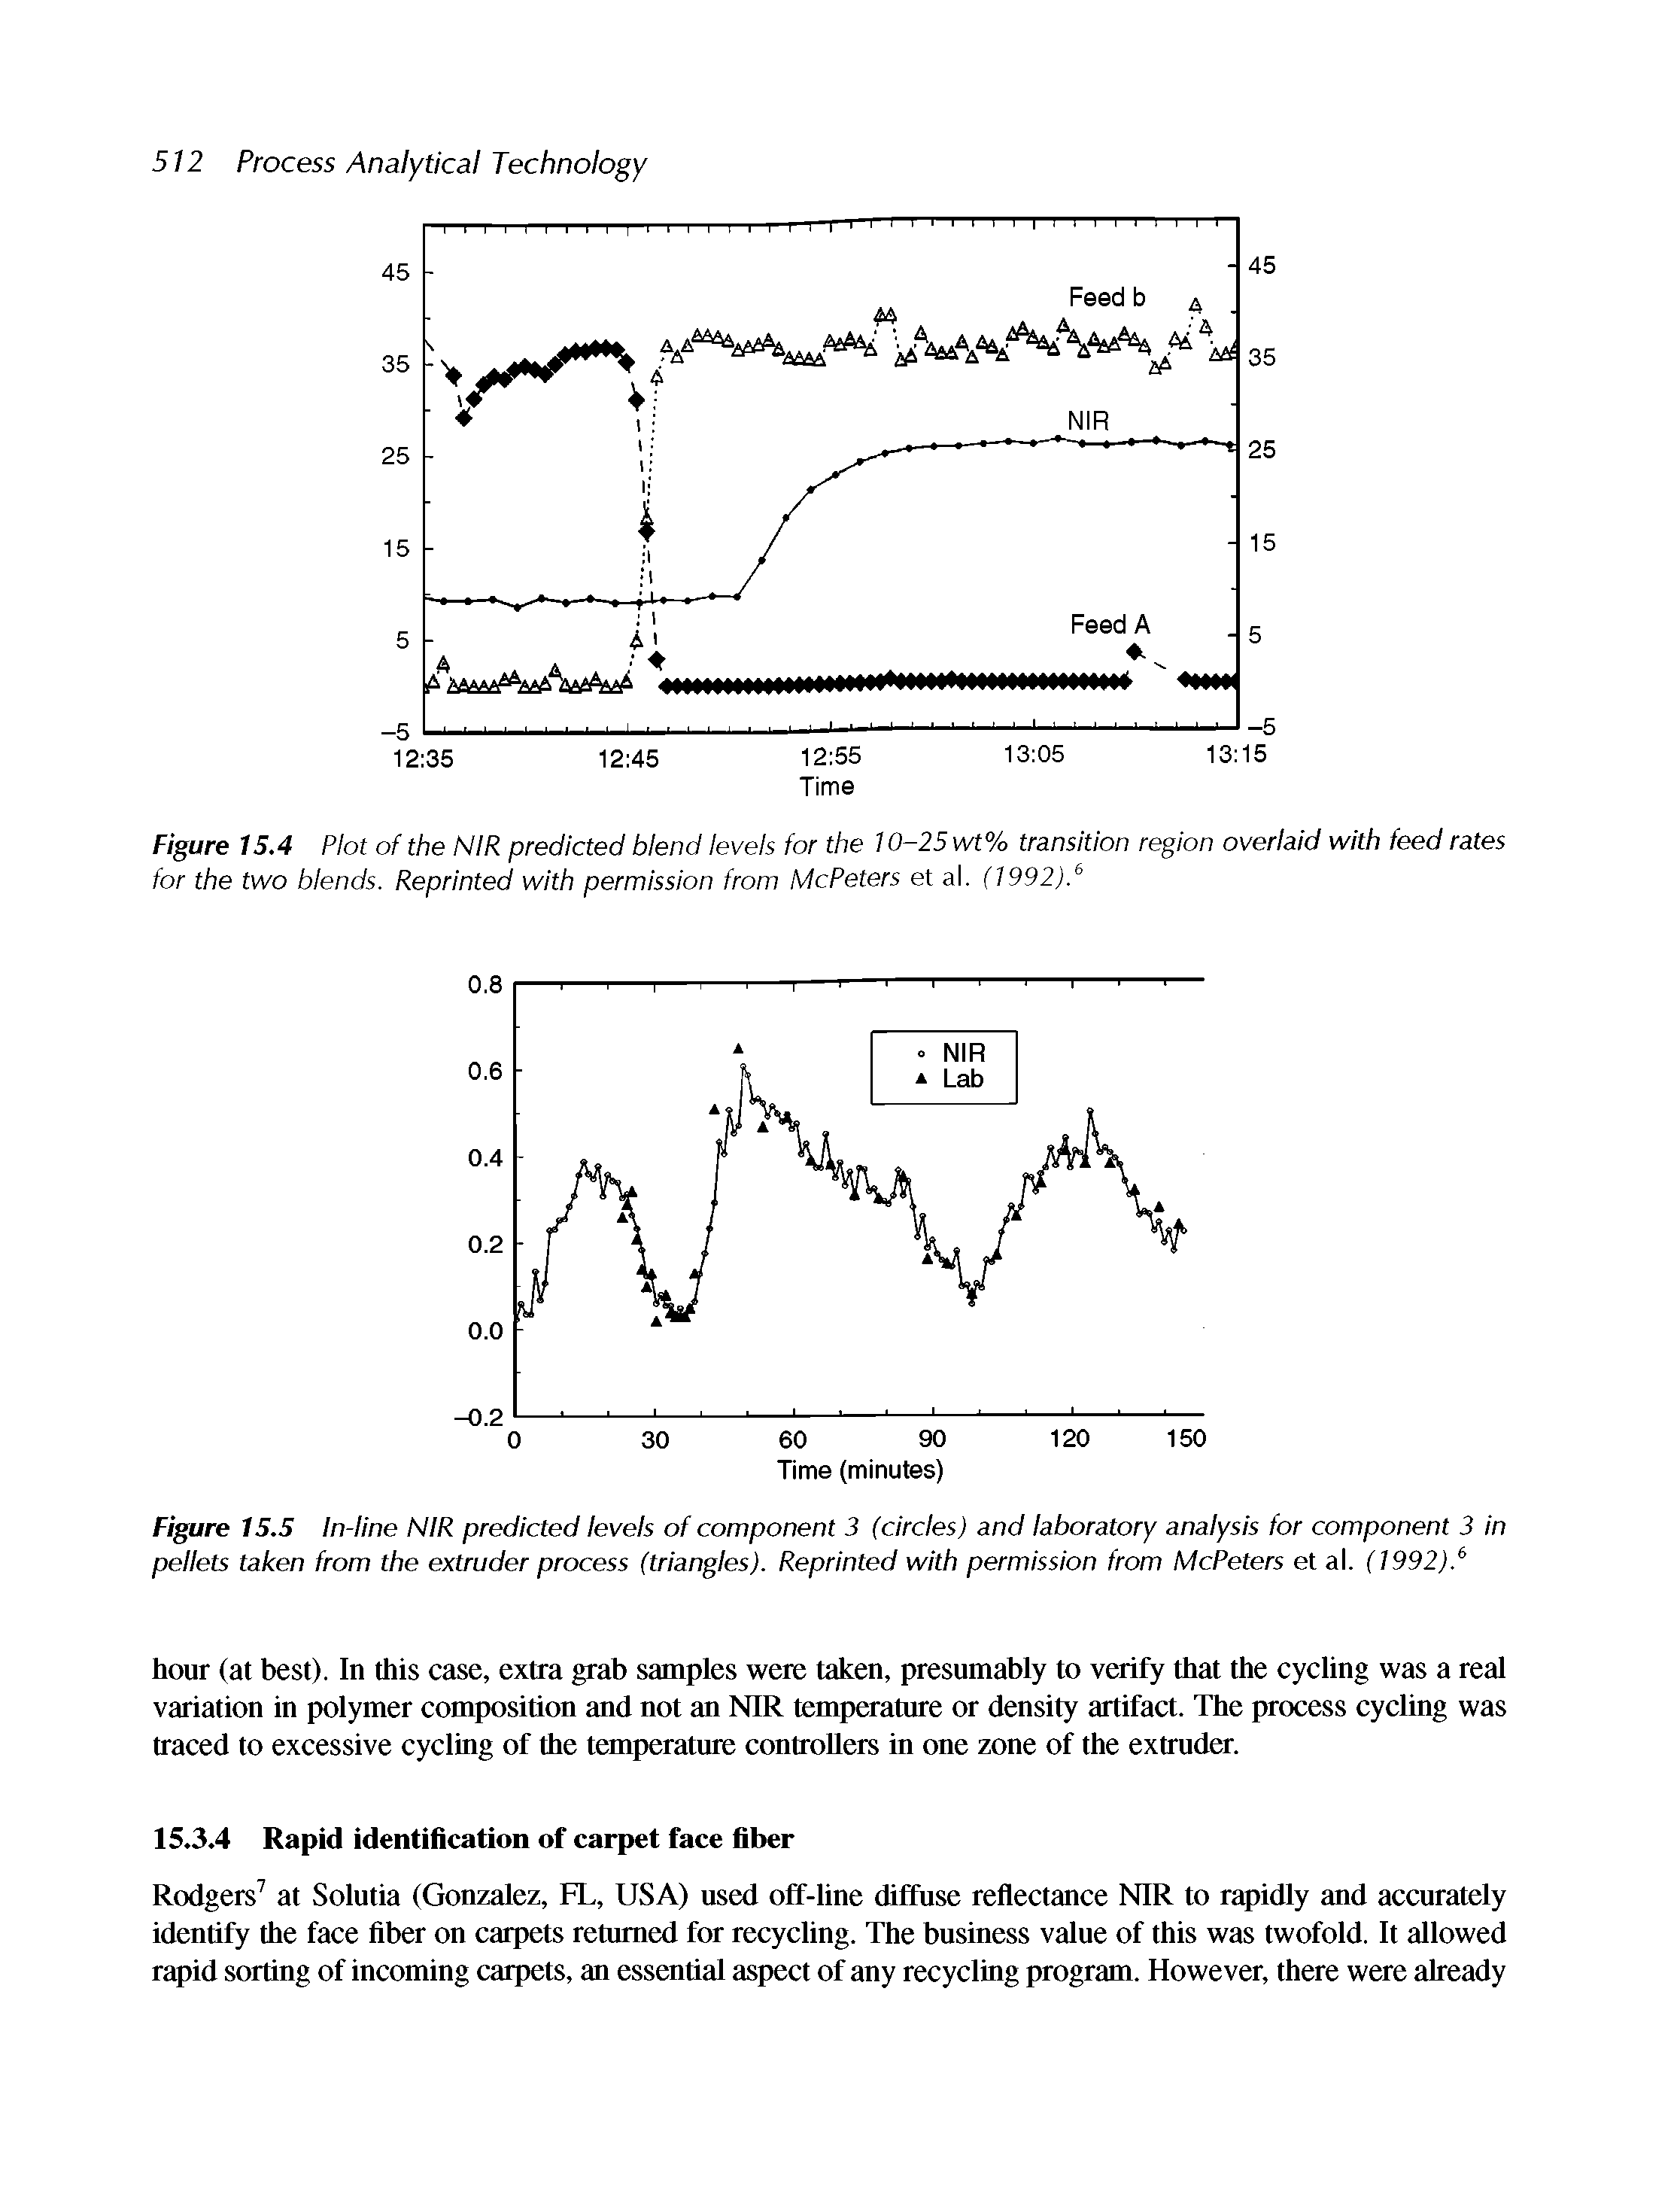 Figure 15.5 In-line NIR predicted levels of component 3 (circles) and laboratory analysis for component 3 in pellets taken from the extruder process (triangles). Reprinted with permission from McPeters et al. (1992). "...